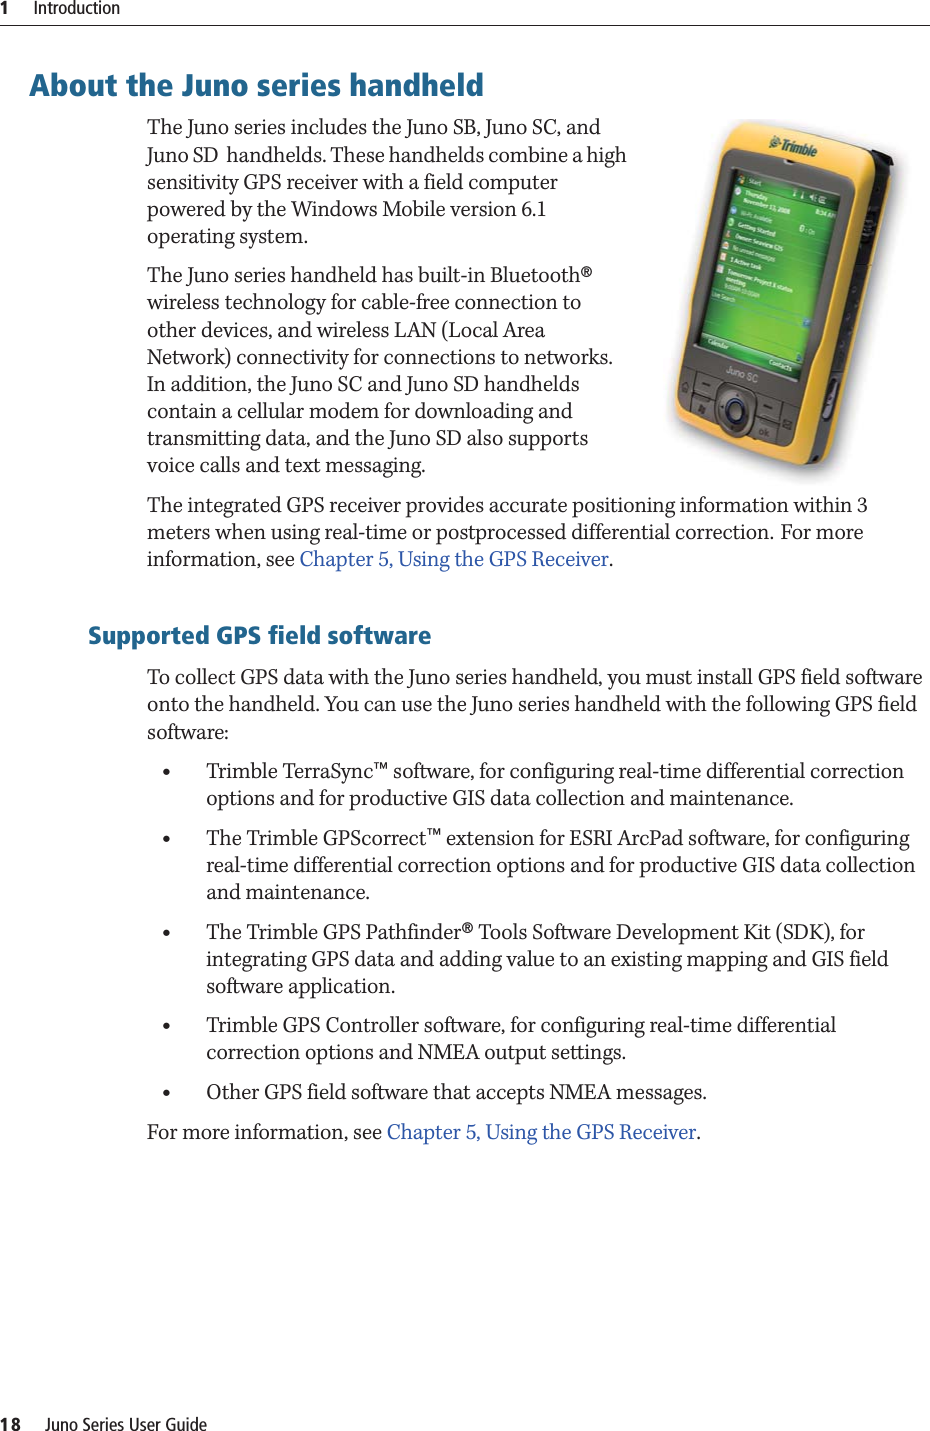 1     Introduction18     Juno Series User GuideAbout the Juno series handheldThe Juno series includes the Juno SB, Juno SC, and Juno SD  handhelds. These handhelds combine a high sensitivity GPS receiver with a field computer powered by the Windows Mobile version 6.1 operating system. The Juno series handheld has built-in Bluetooth® wireless technology for cable-free connection to other devices, and wireless LAN (Local Area Network) connectivity for connections to networks. In addition, the Juno SC and Juno SD handhelds contain a cellular modem for downloading and transmitting data, and the Juno SD also supports voice calls and text messaging.The integrated GPS receiver provides accurate positioning information within 3 meters when using real-time or postprocessed differential correction. For more information, see Chapter 5, Using the GPS Receiver. Supported GPS field softwareTo collect GPS data with the Juno series handheld, you must install GPS field software onto the handheld. You can use the Juno series handheld with the following GPS field software:•Trimble TerraSync™ software, for configuring real-time differential correction options and for productive GIS data collection and maintenance.•The Trimble GPScorrect™ extension for ESRI ArcPad software, for configuring real-time differential correction options and for productive GIS data collection and maintenance.•The Trimble GPS Pathfinder® Tools Software Development Kit (SDK), for integrating GPS data and adding value to an existing mapping and GIS field software application.•Trimble GPS Controller software, for configuring real-time differential correction options and NMEA output settings.•Other GPS field software that accepts NMEA messages.For more information, see Chapter 5, Using the GPS Receiver.